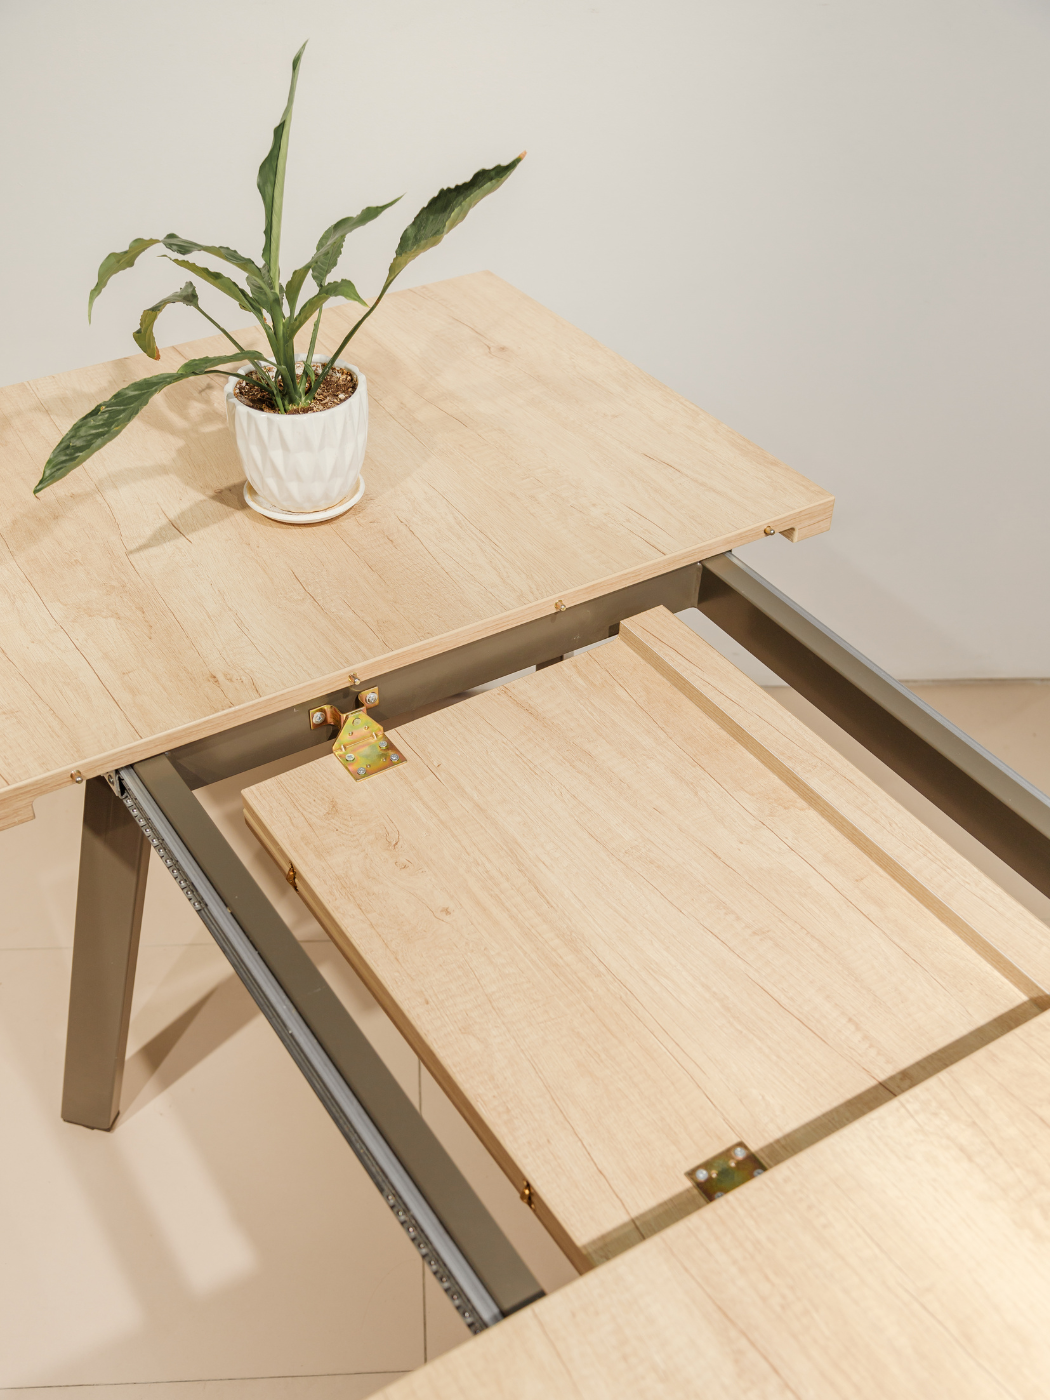 Wooden extendable table